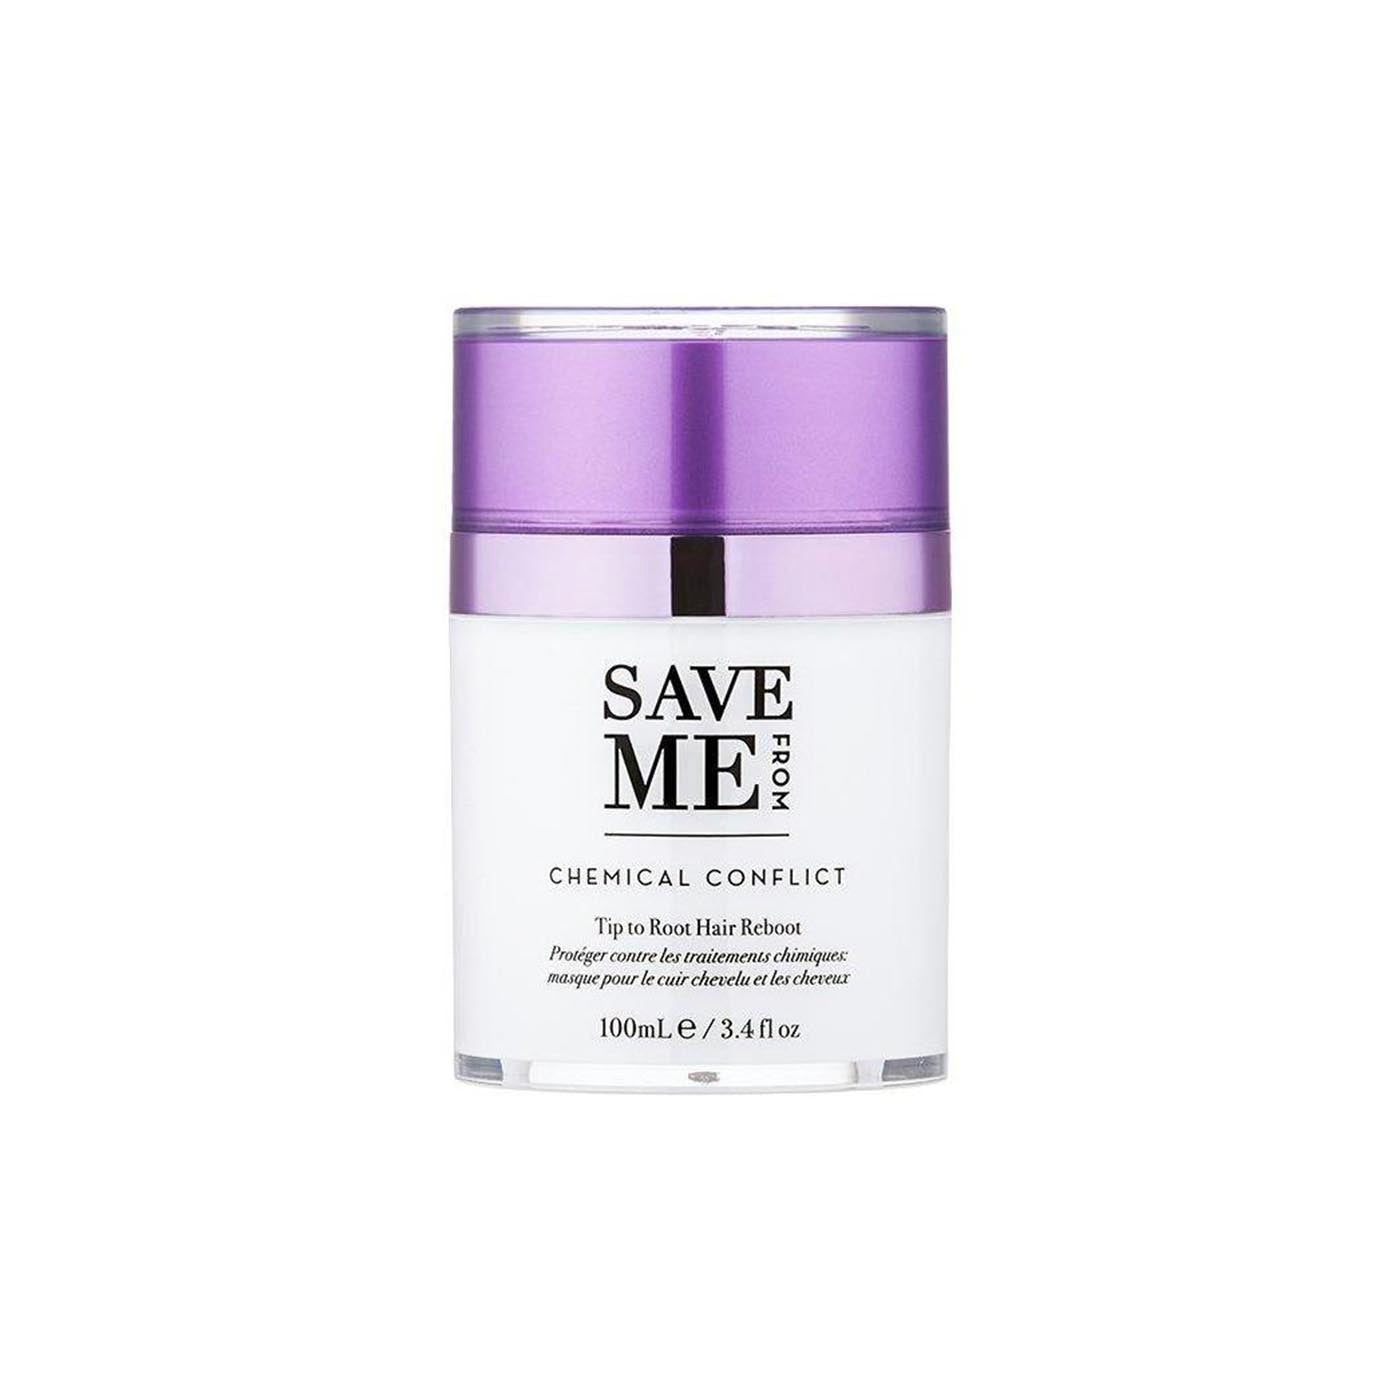 CHEMICAL CONFLICT - Tip to Root Hair Reboot 3.4 fl oz | Save Me From